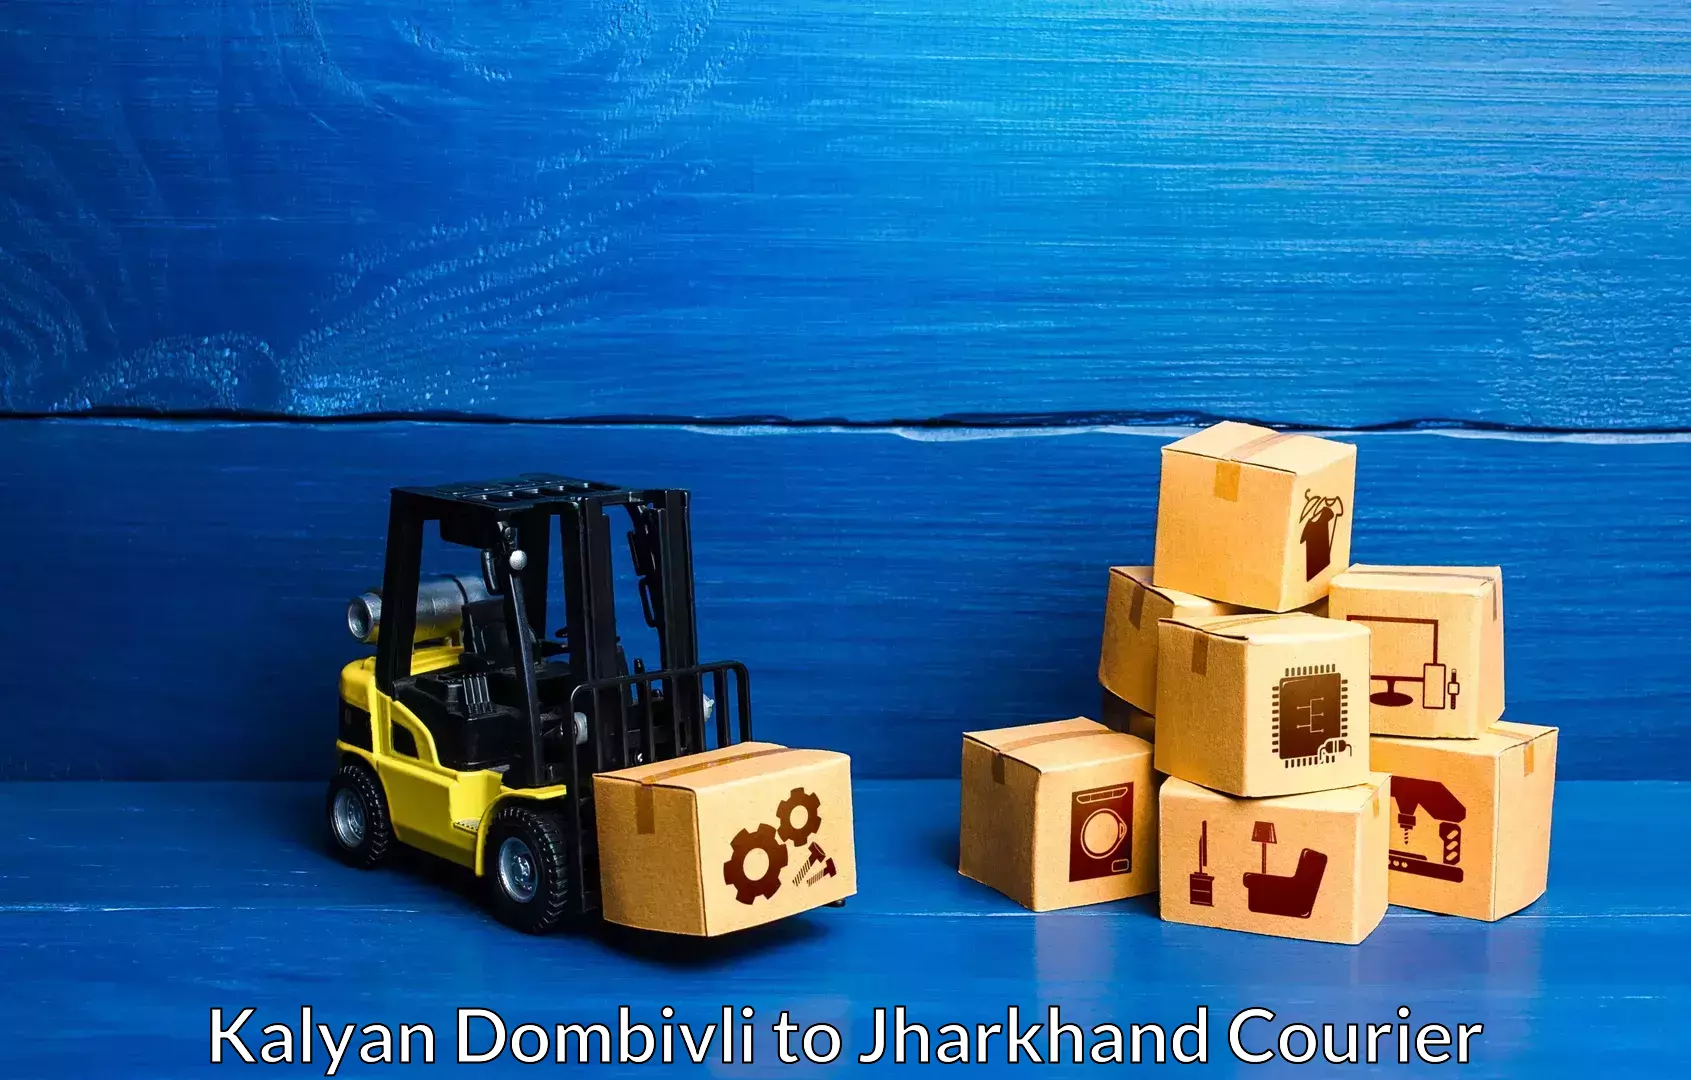 Furniture moving specialists Kalyan Dombivli to Jharkhand